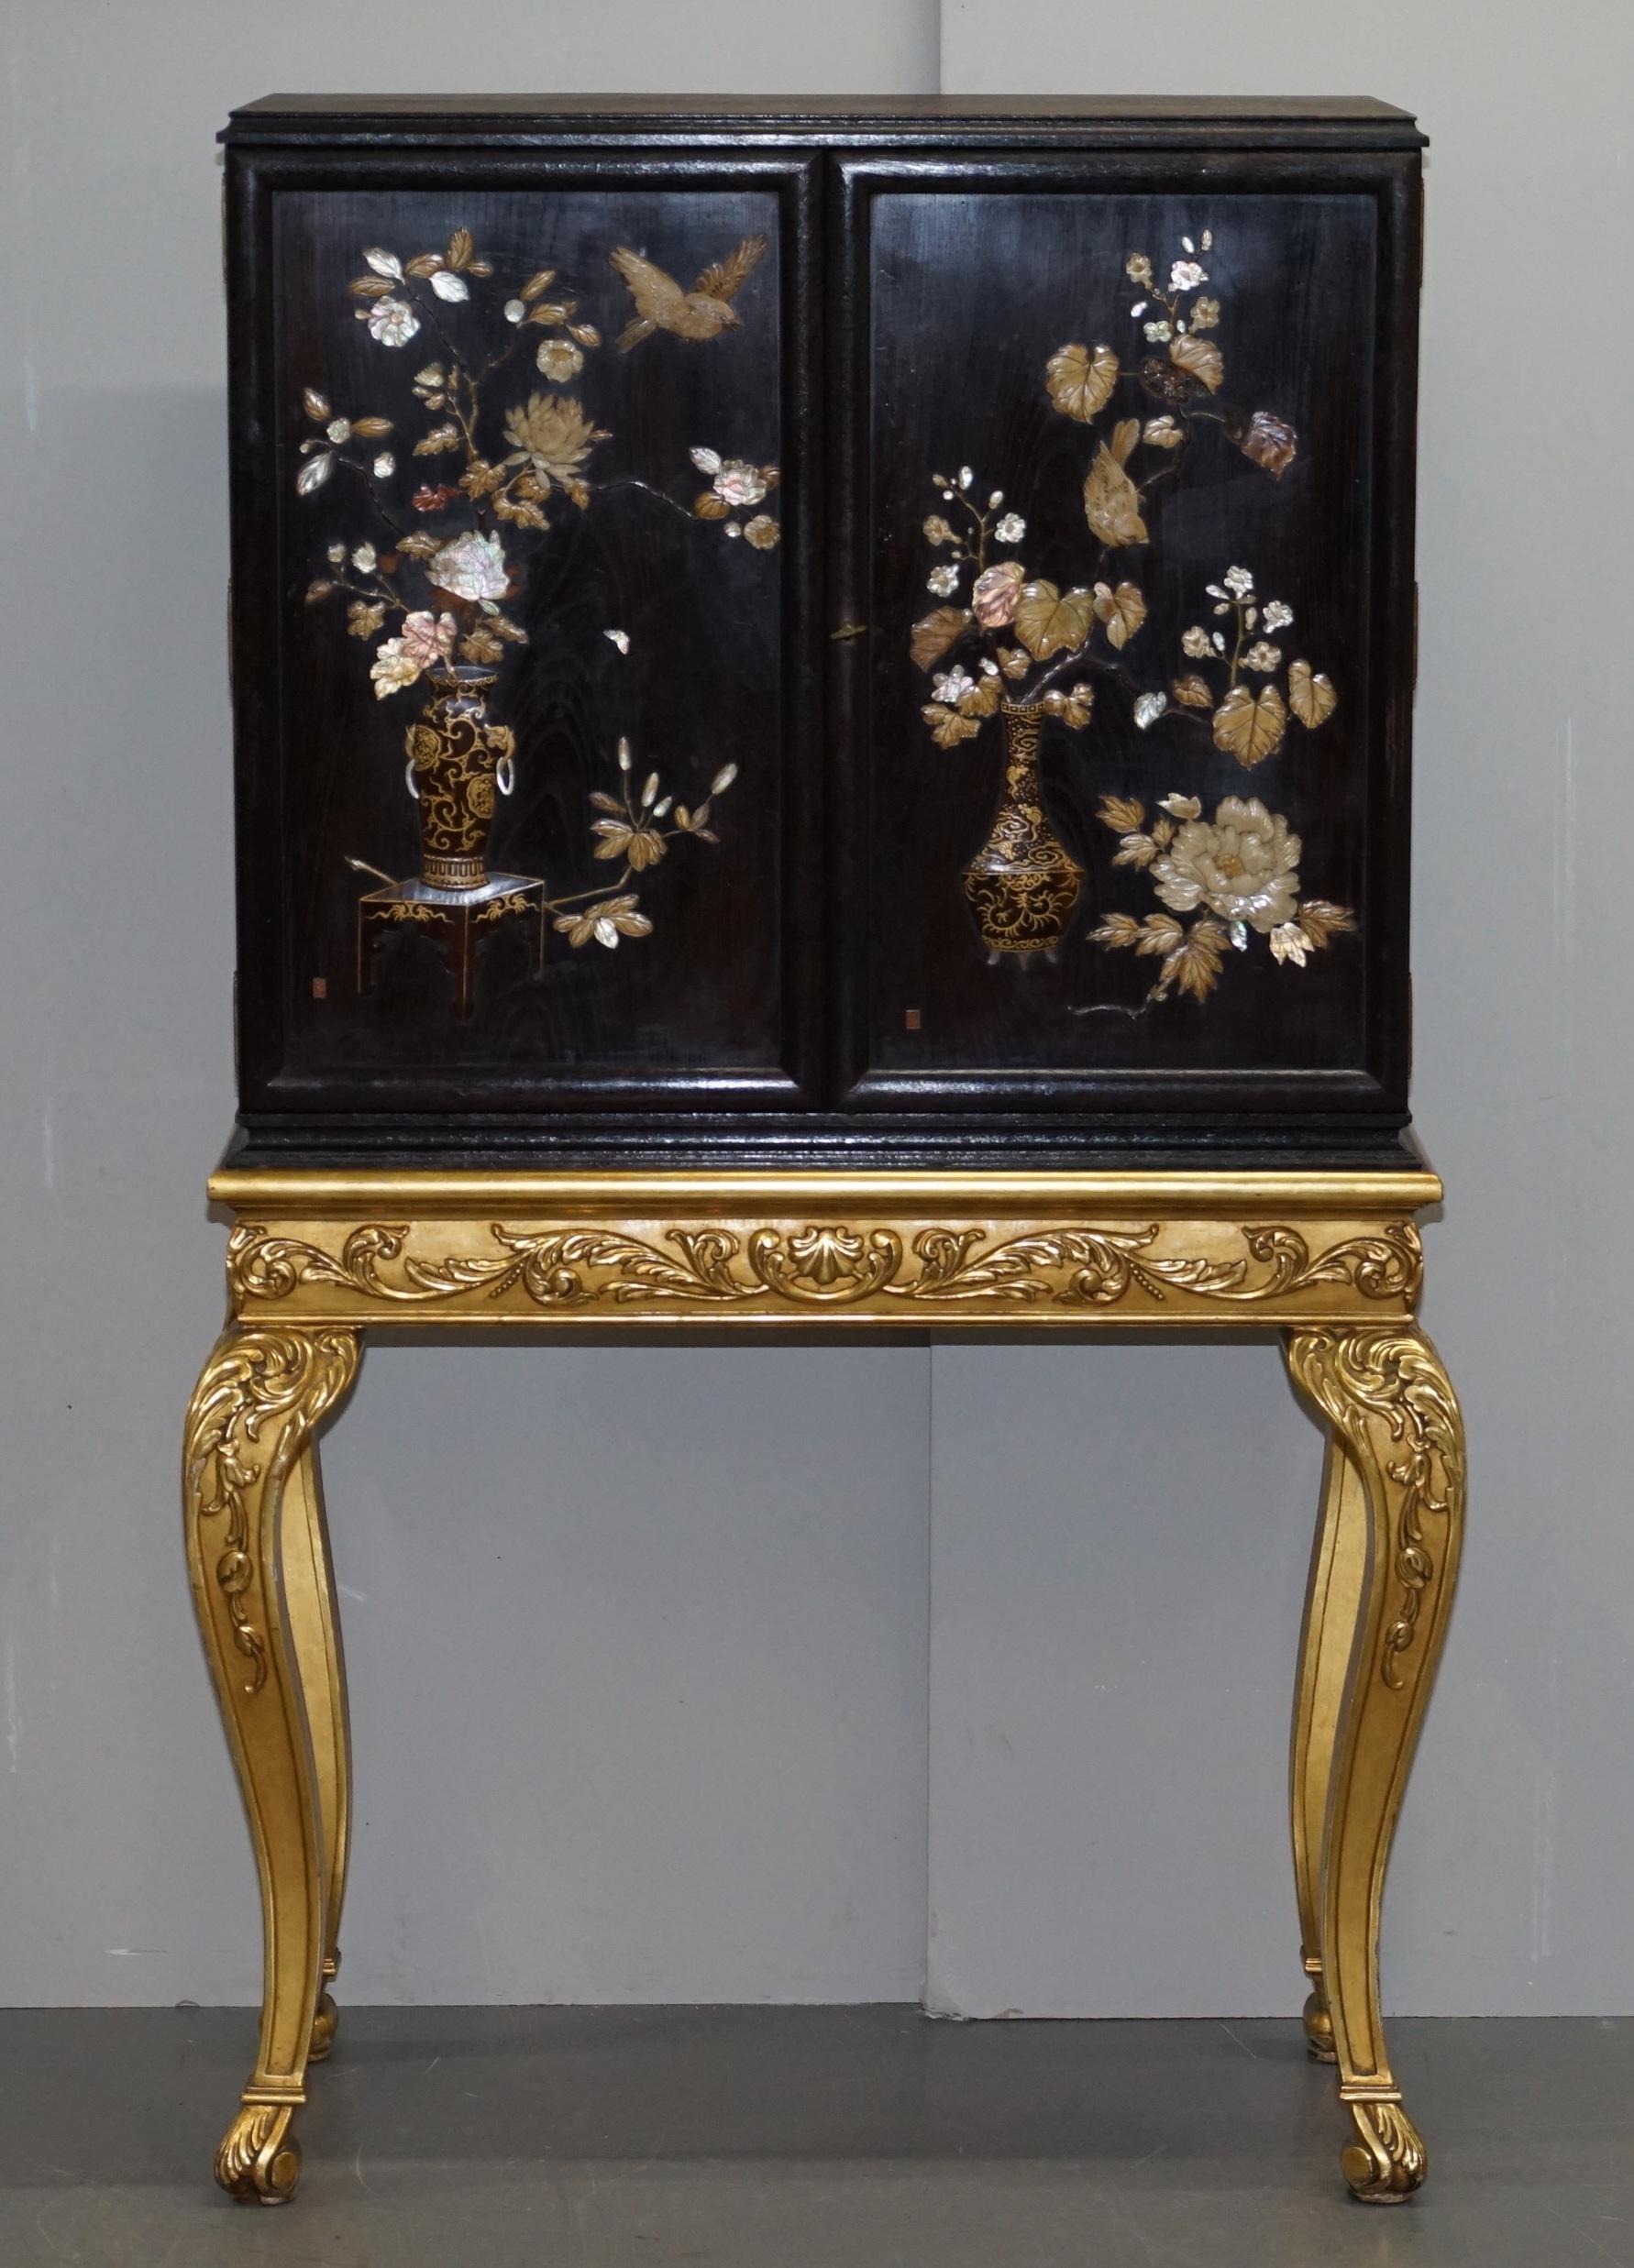 We are delighted to offer for sale this lovely vintage Chinese chinoiserie hardwood drinks cabinet with gold giltwood base and both doors signed

A good looking and decorative piece, made as a drink’s cabinet in the late 18th-early 19th in the